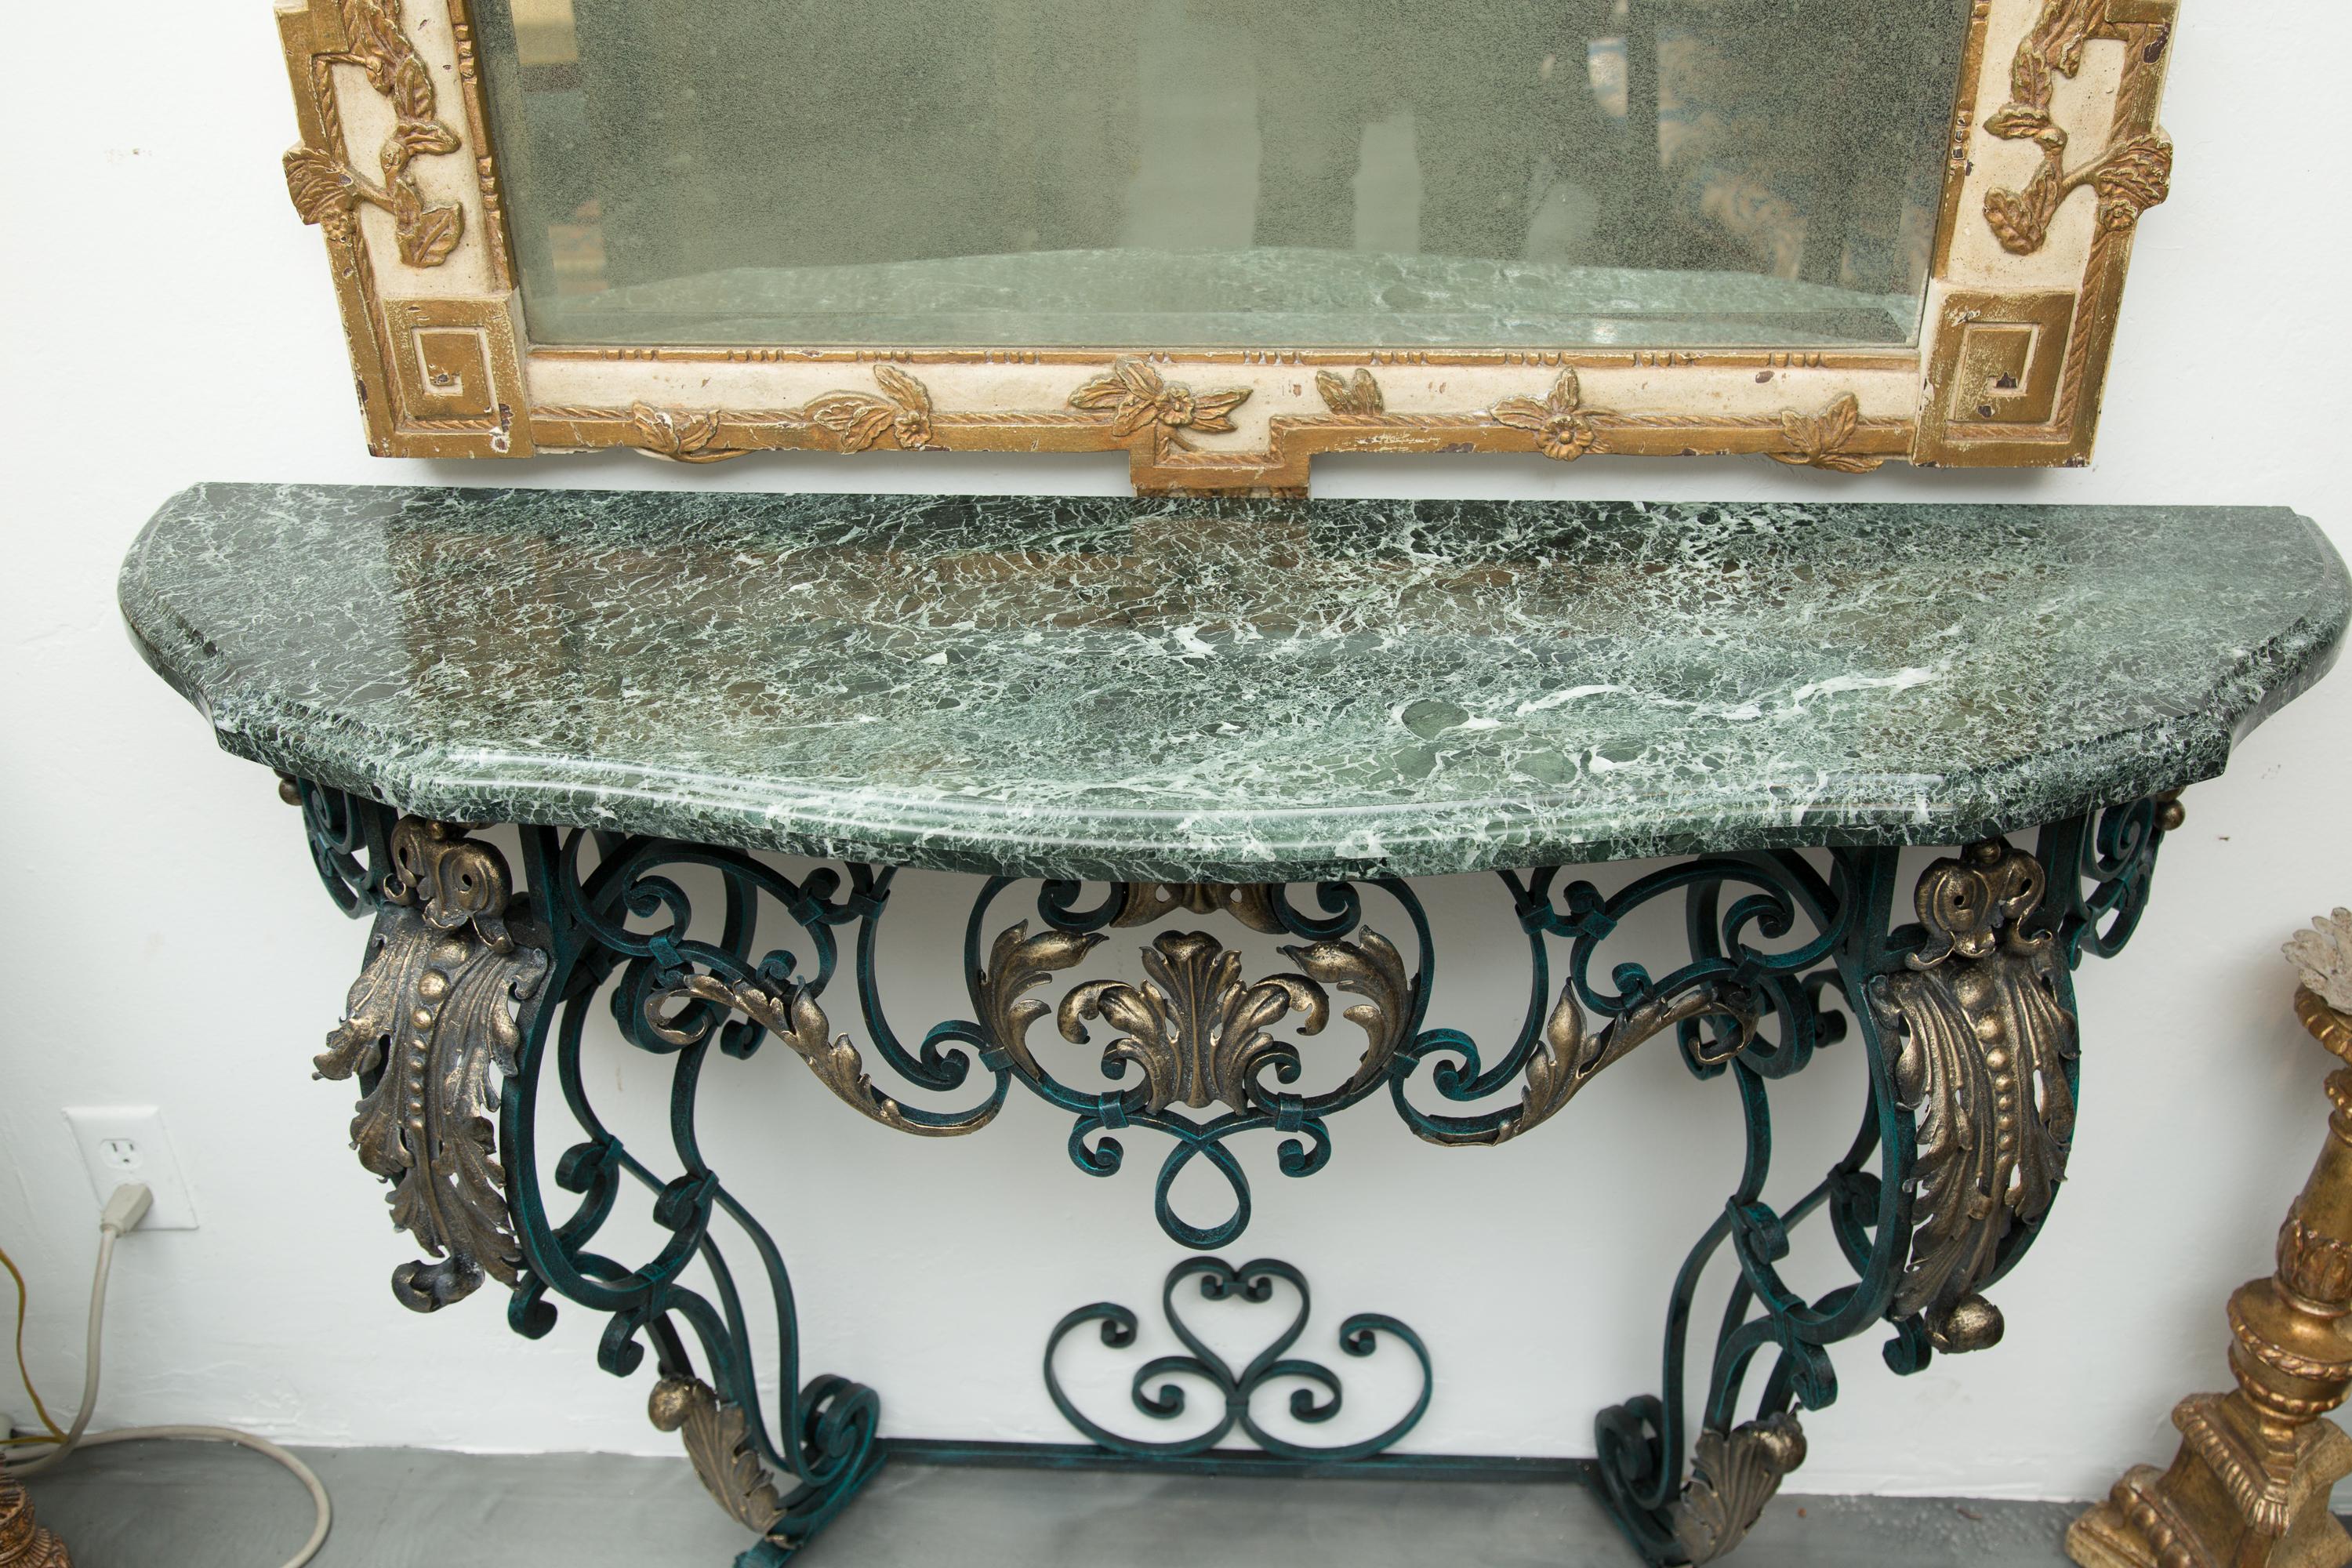 This is an attractive 19th century restored verdigris and parcel-gilt French console. The variegated green marble top is situated on an ornate scrolling iron frieze, supported by graceful cabriole-form legs joined by a bottom stretcher.